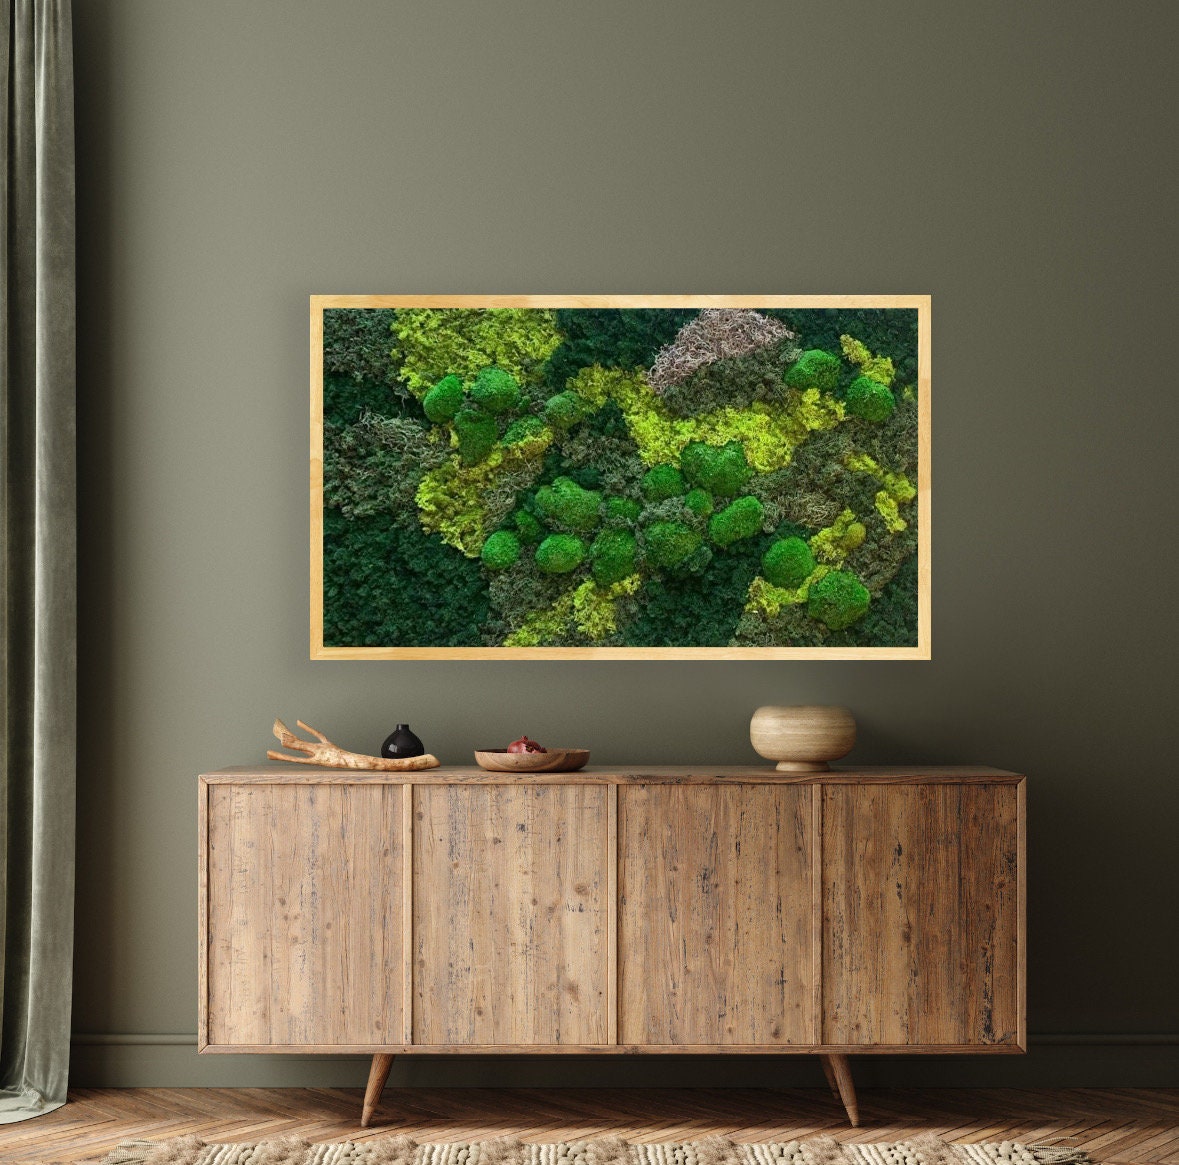 Large Preserved Living Wall 68 x 33